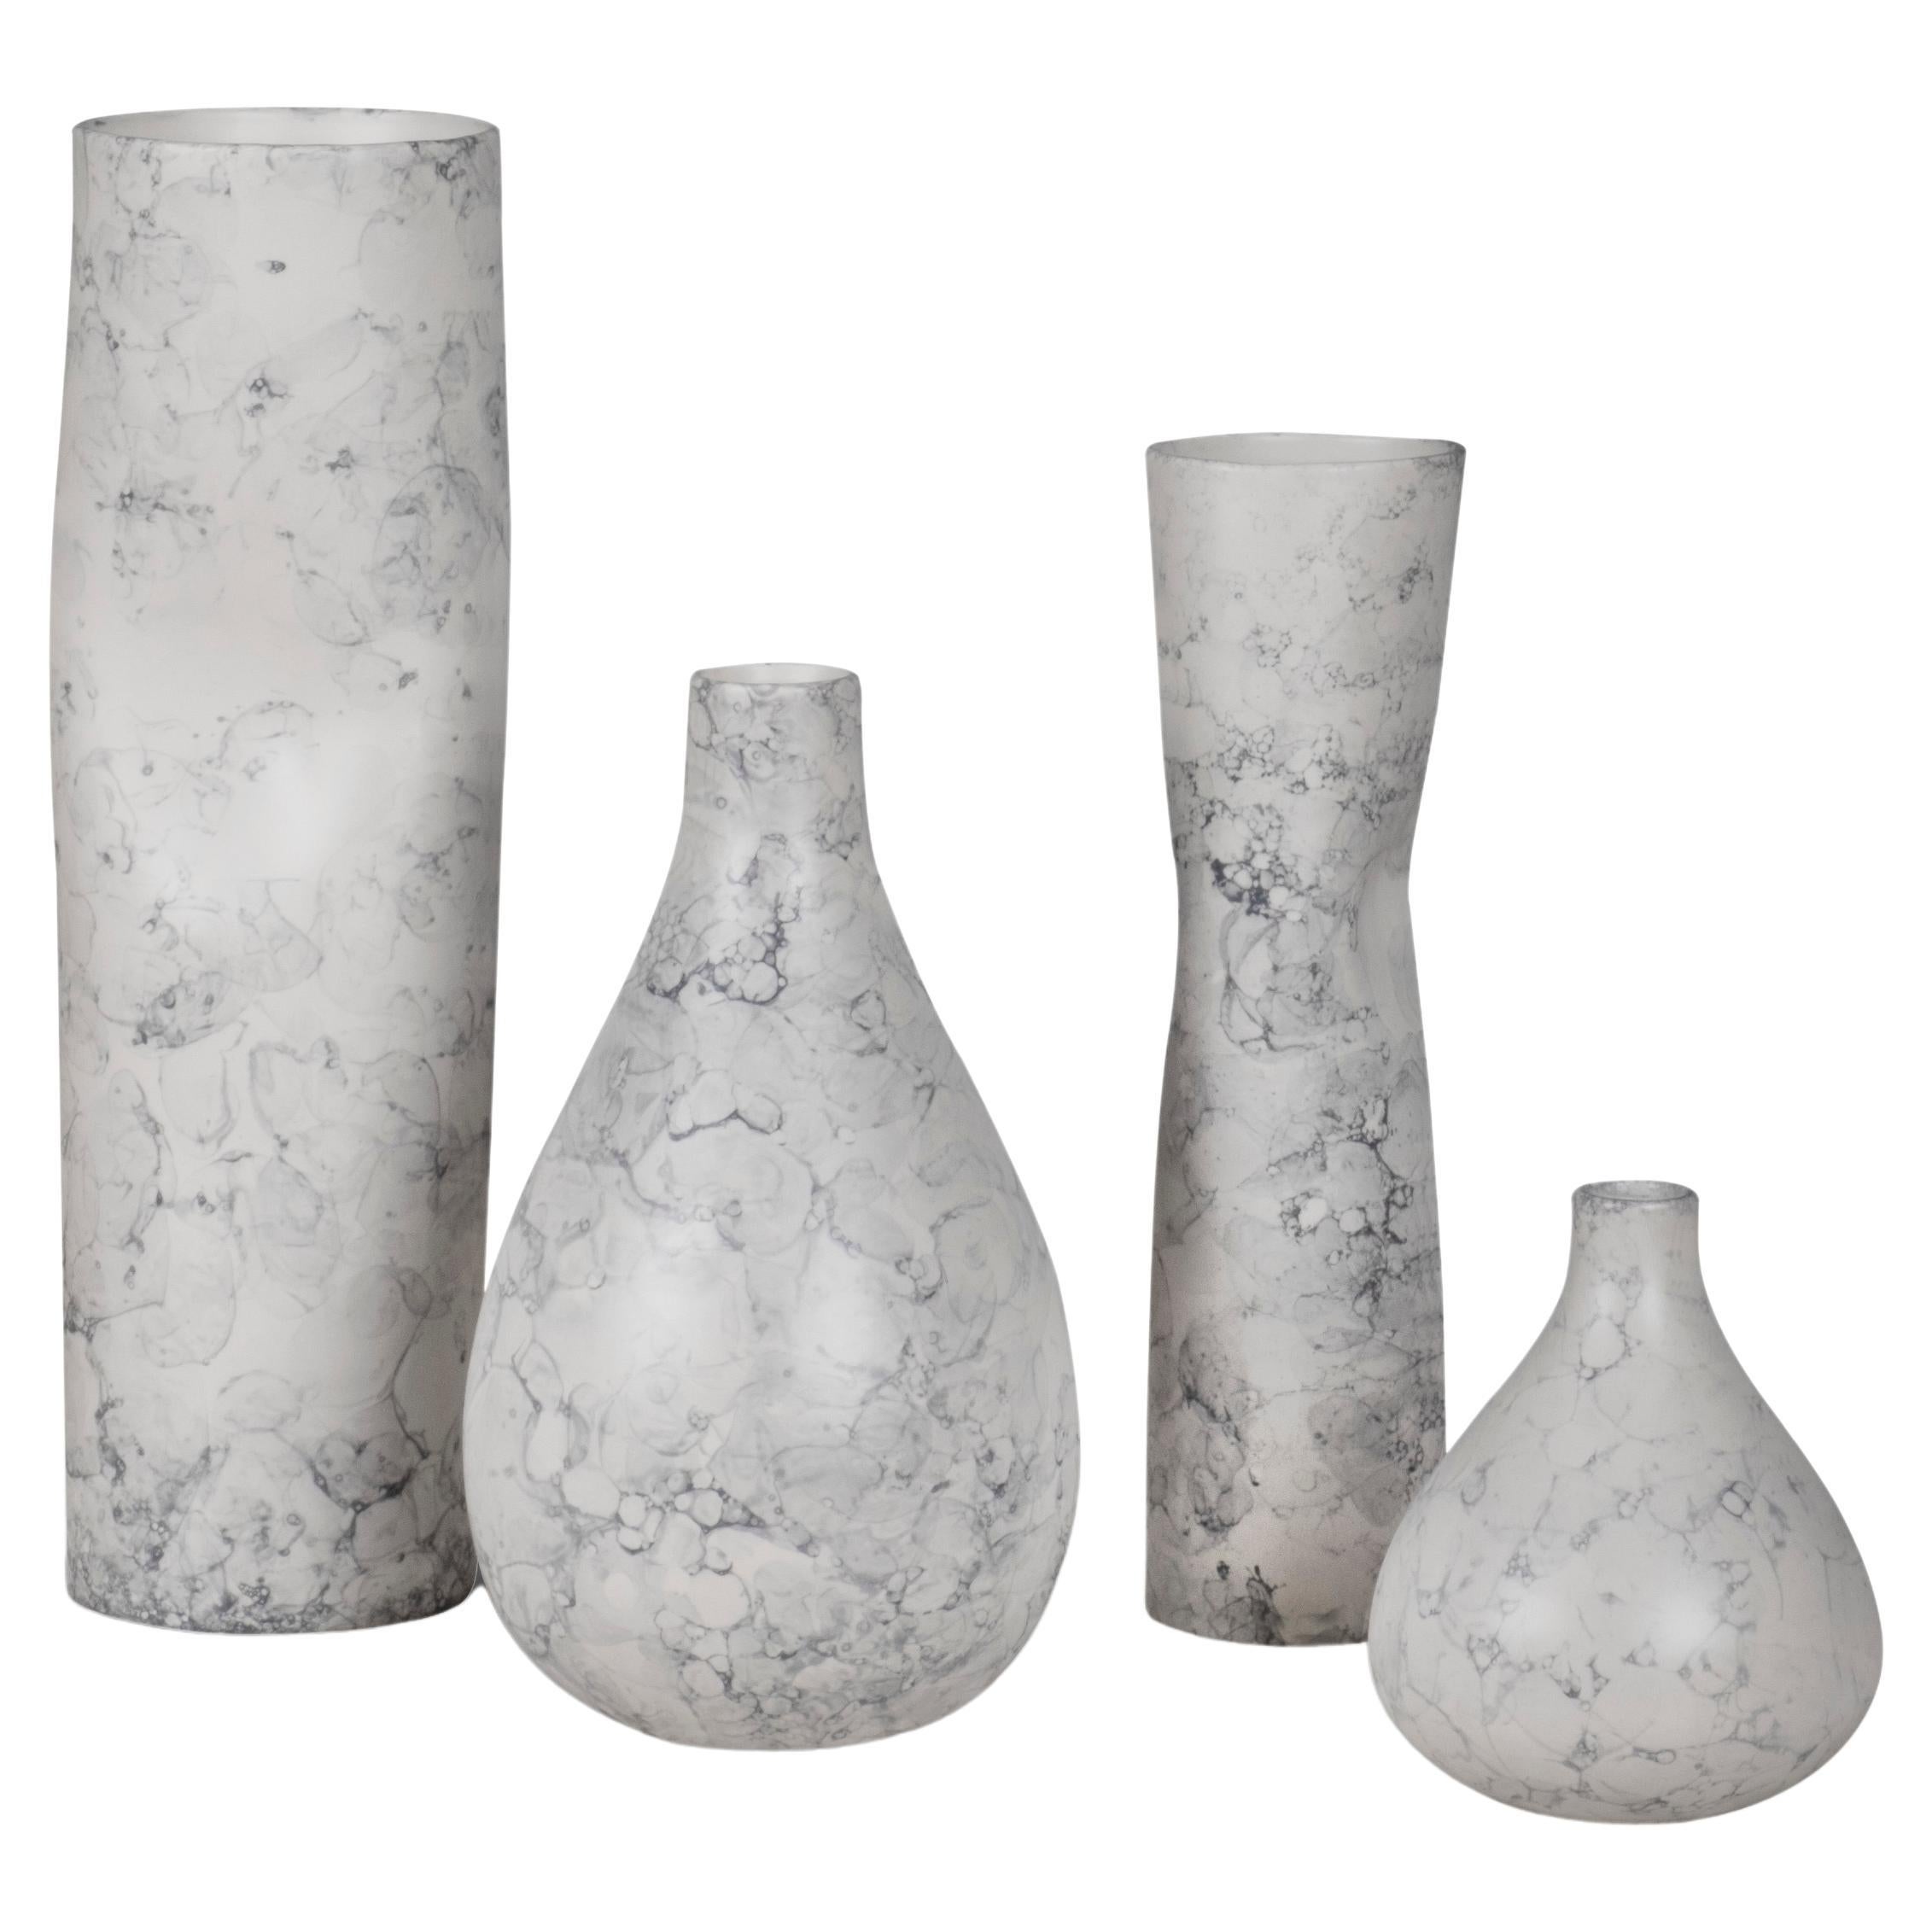 21st Century Modern Set of 4 Vases Handcrafted in Portugal by Greenapple